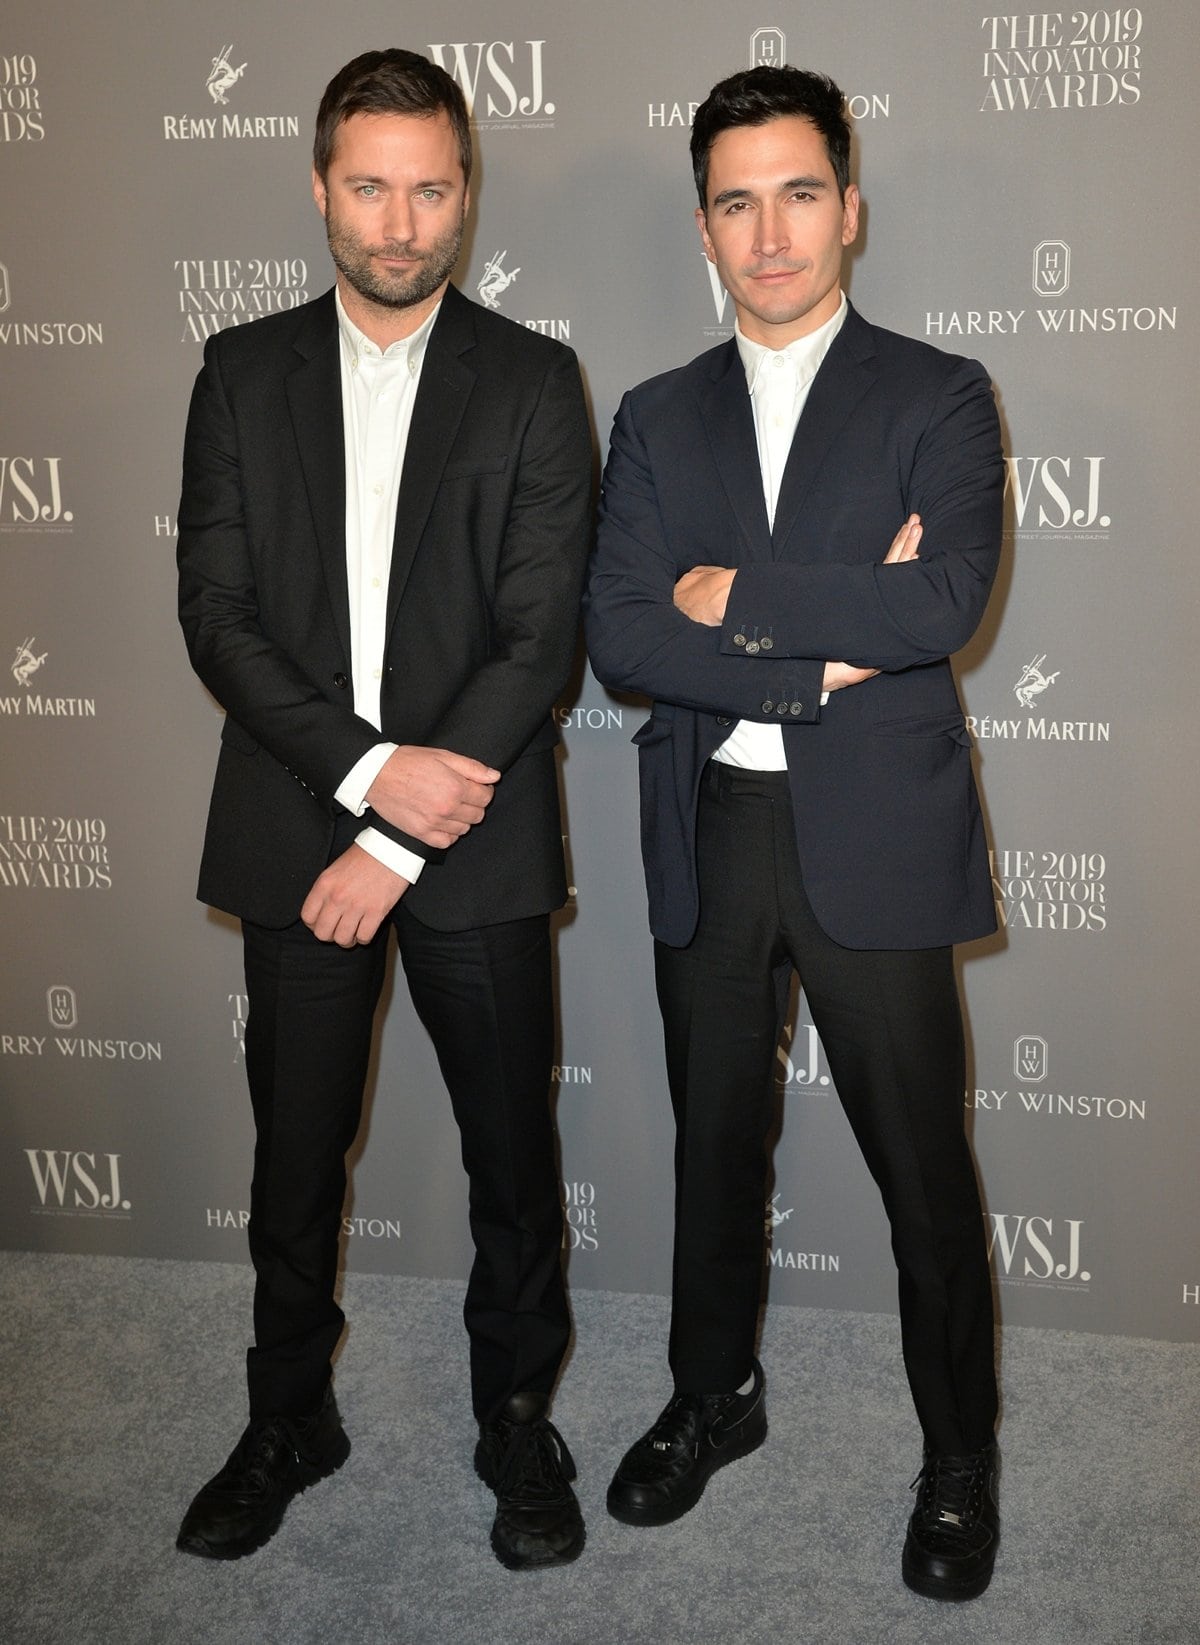 Jack McCollough and Lazaro Hernandez, the designers behind the New York-based label Proenza Schouler, named the label after the maiden names of their mothers